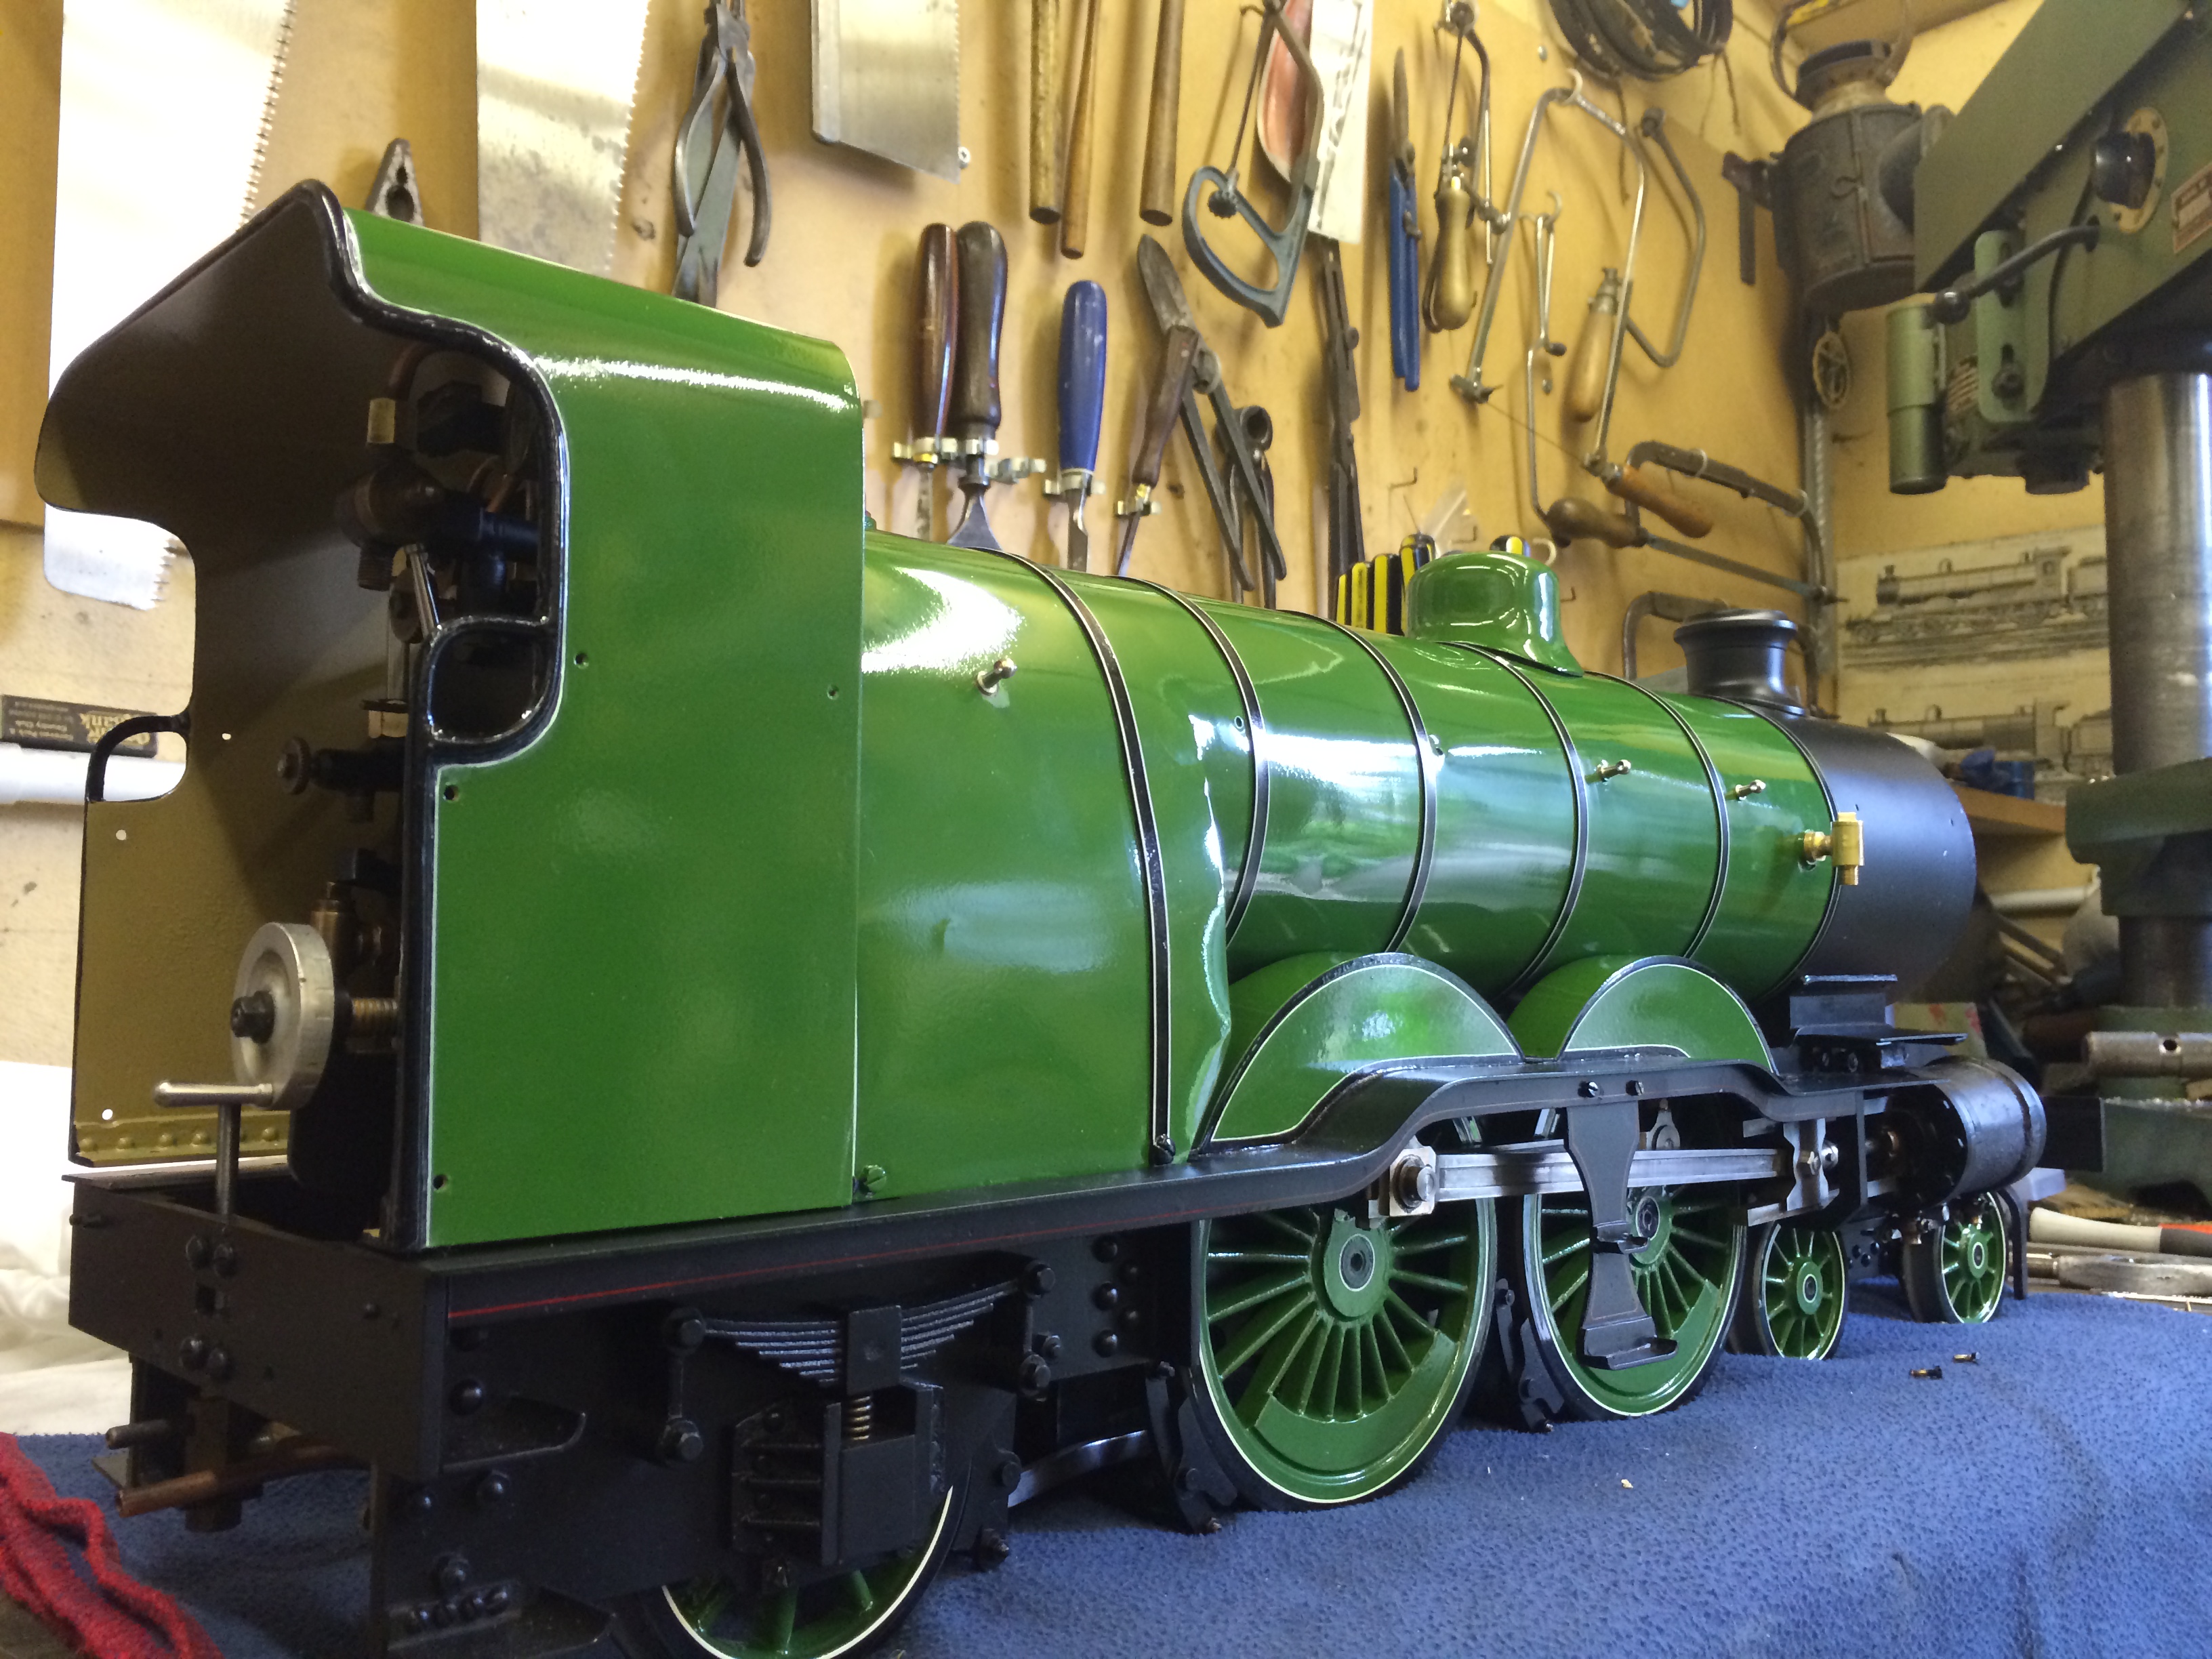 test LBSC Maisie LNER Atlantic live steam locomotive for sale boiler and cab test fitted